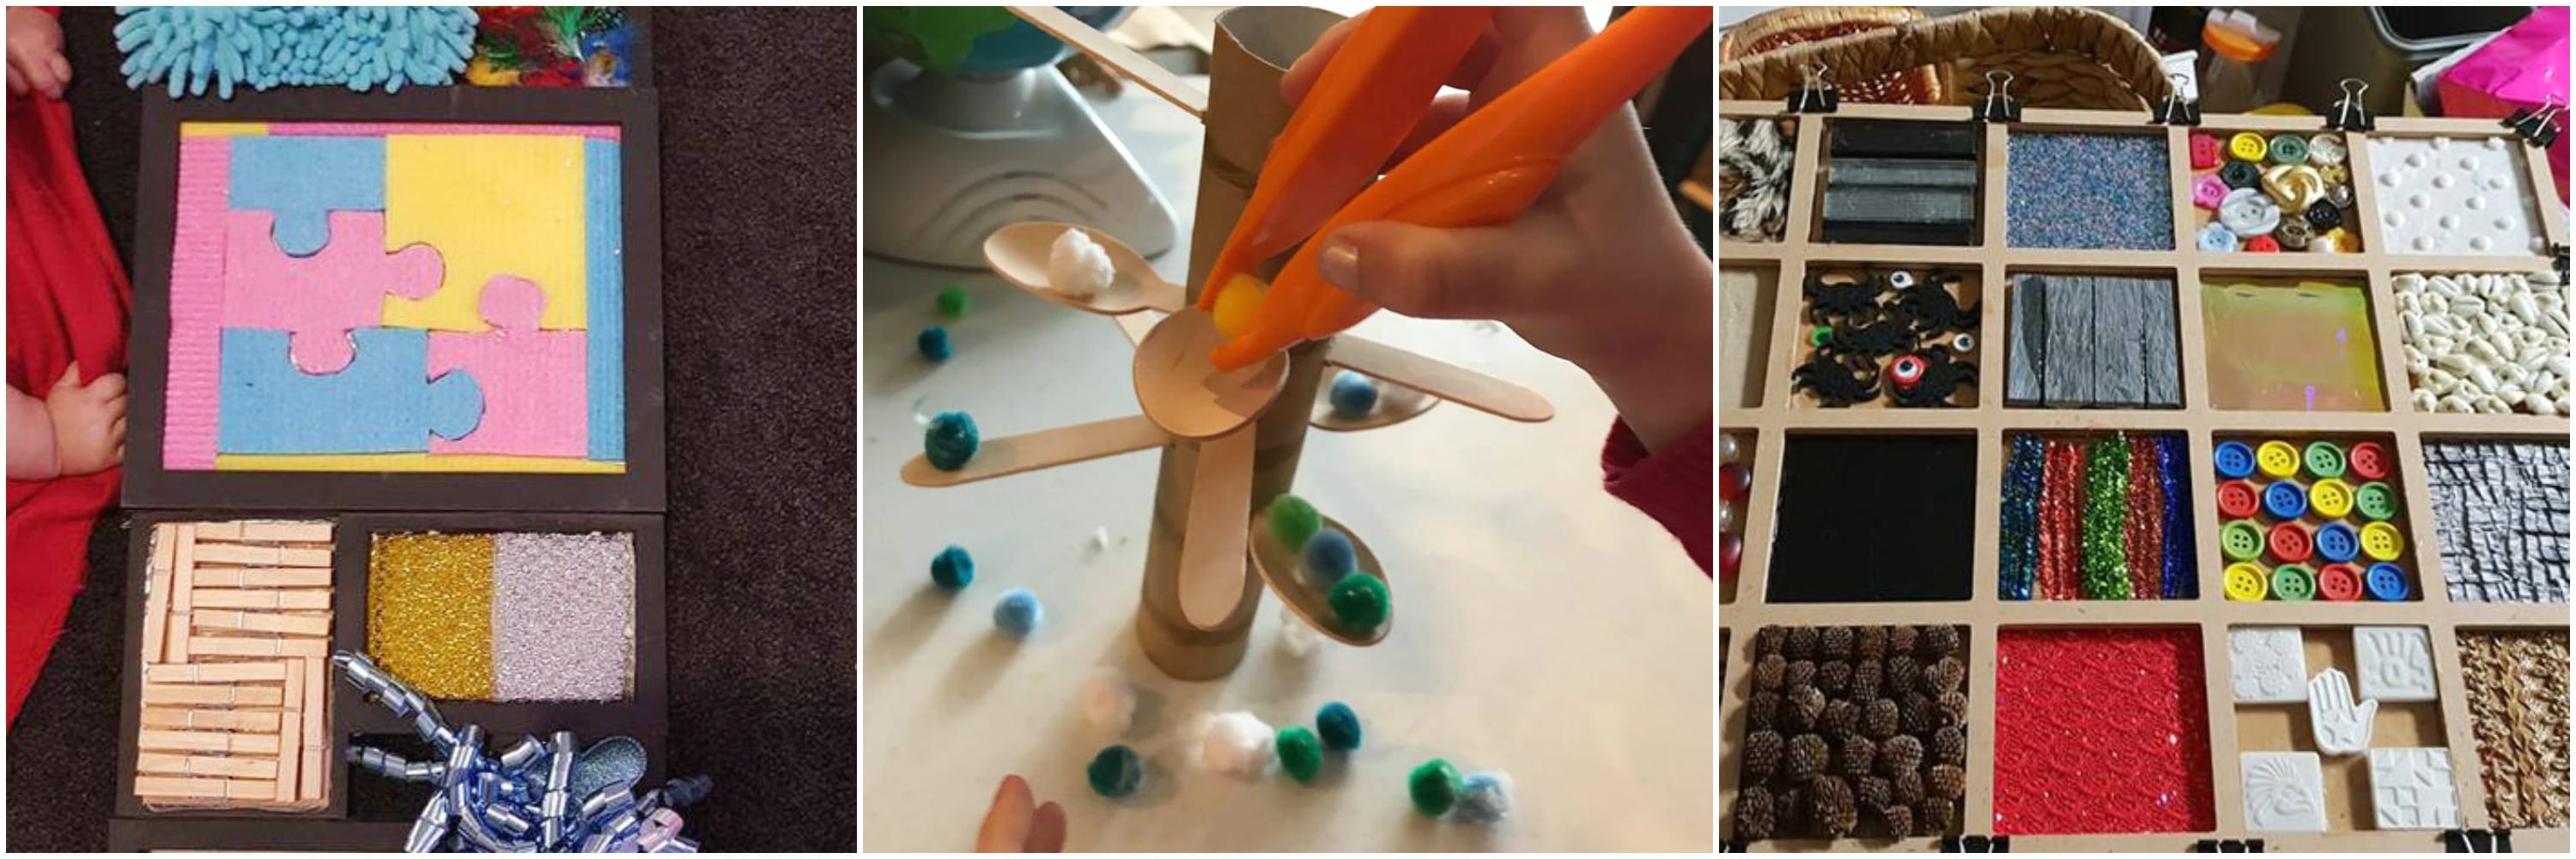 Make your own diy teacher resources for play using the simple ideas and inspiration shared by these early childhood educators. Providing opportunities for learning doesn't need to be expensive for parents, homeschool and home daycare when you use these clever ideas.